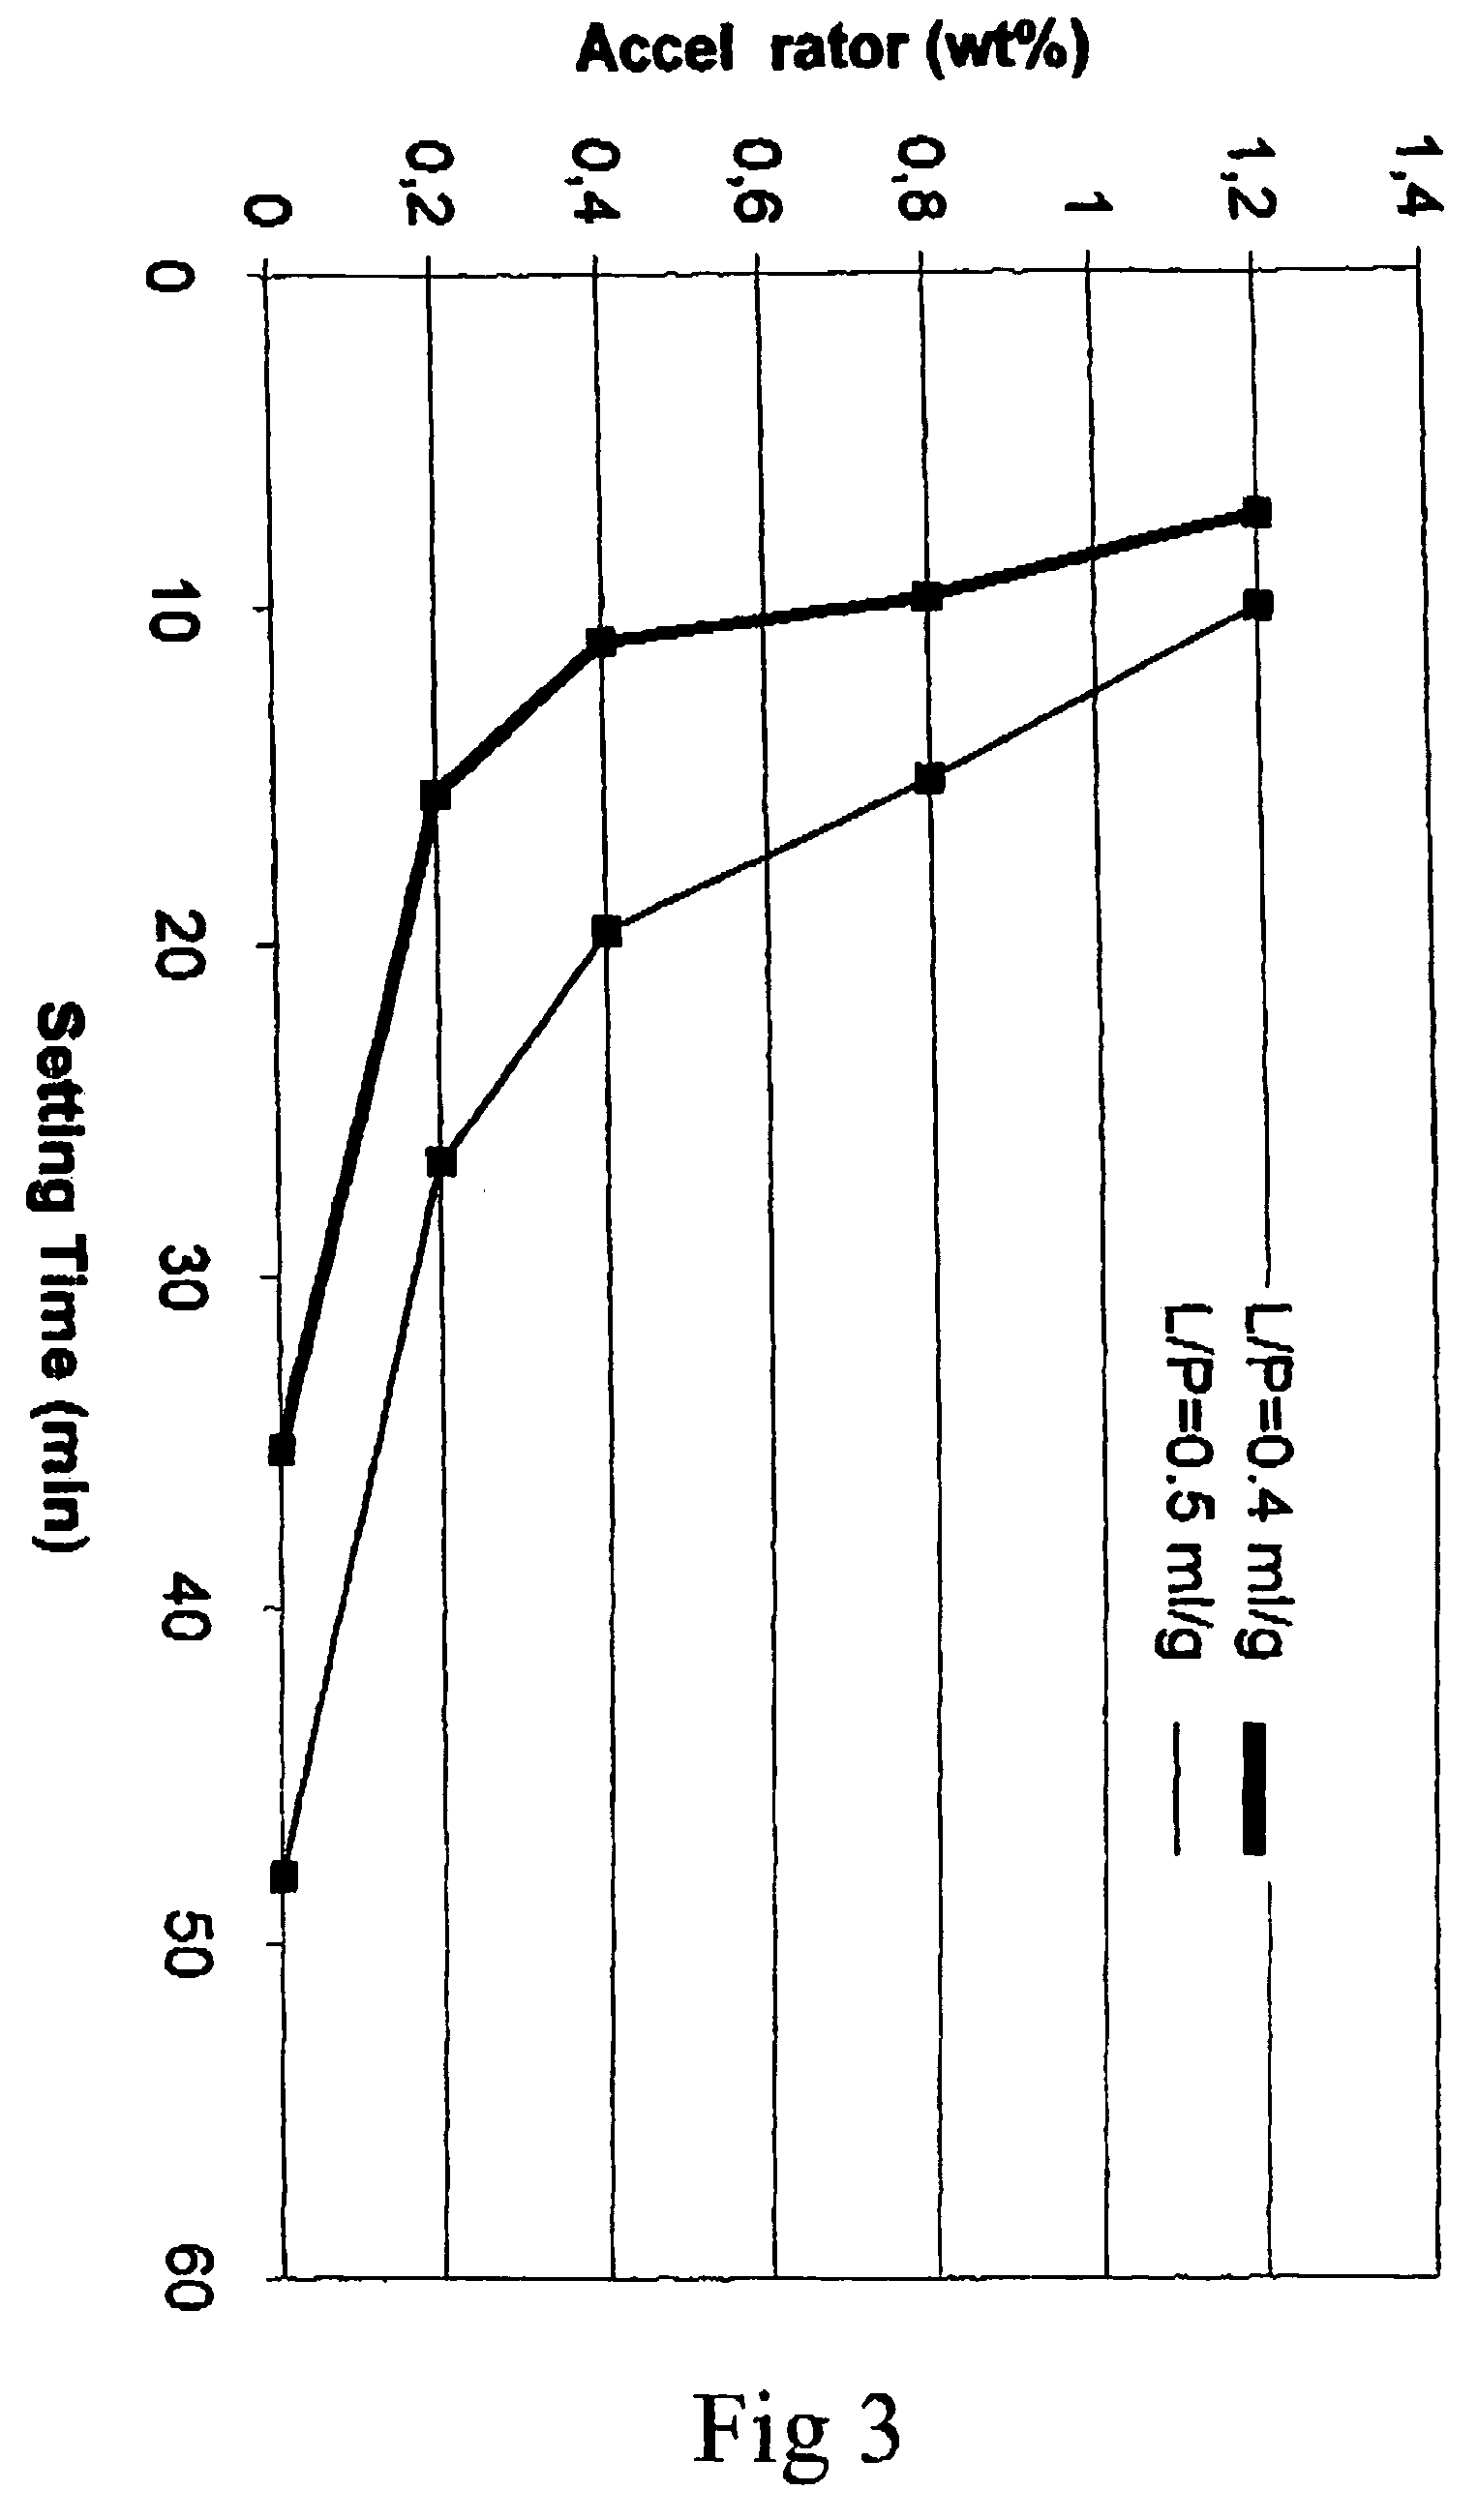 Composition for an injectable bone mineral substitute material